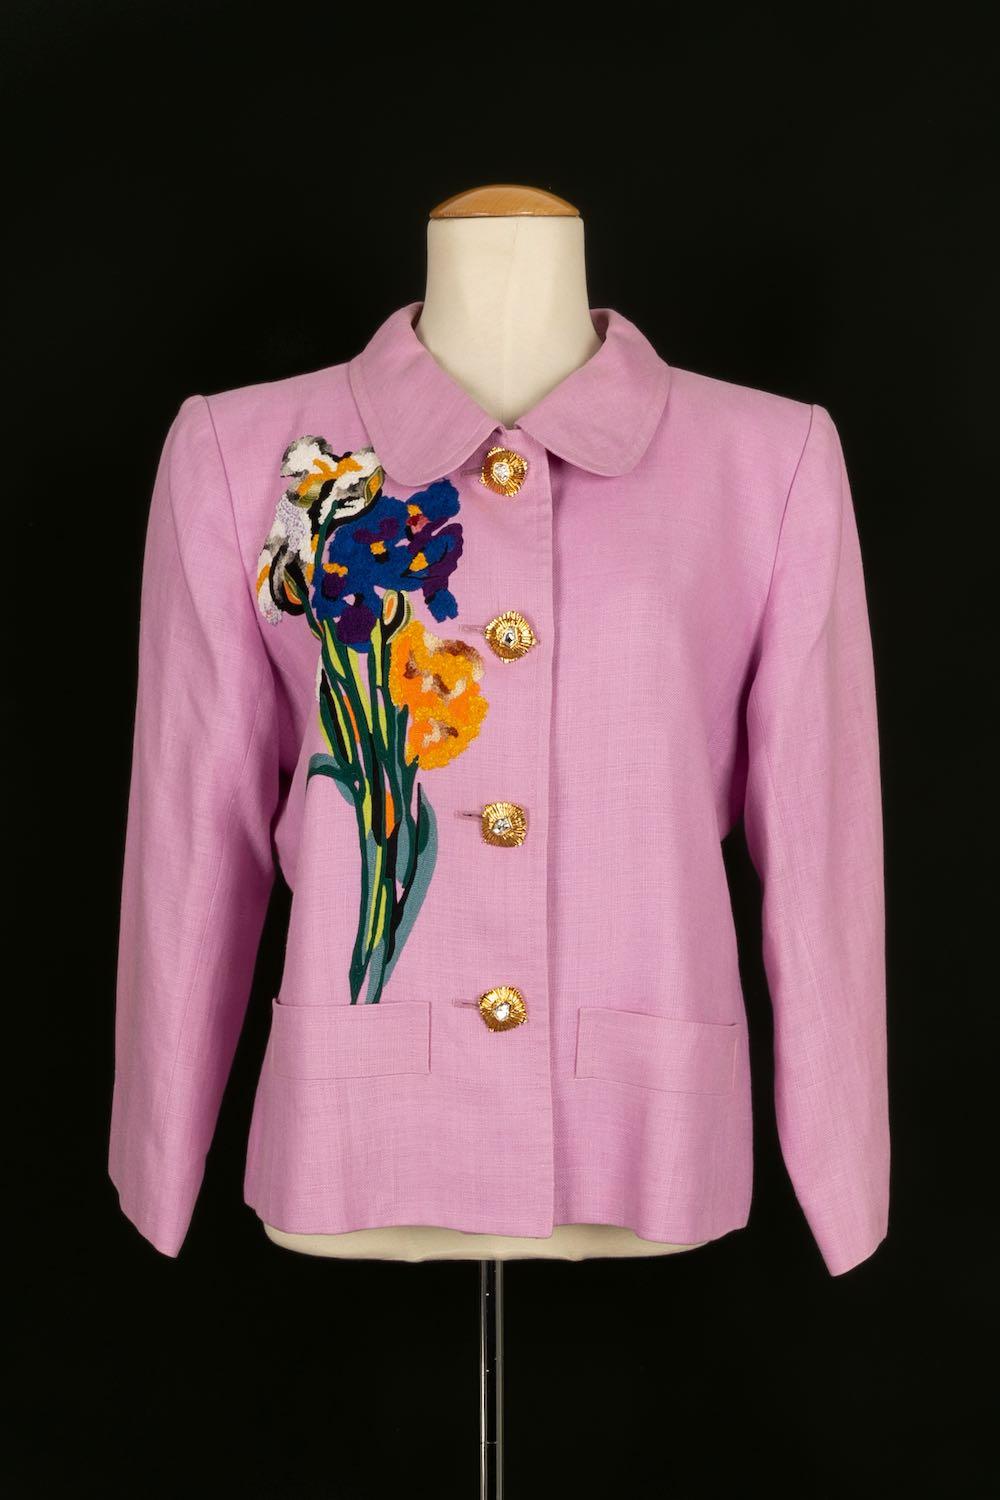 Christian Lacroix Jacket and Skirt in Mauve Suit For Sale 4